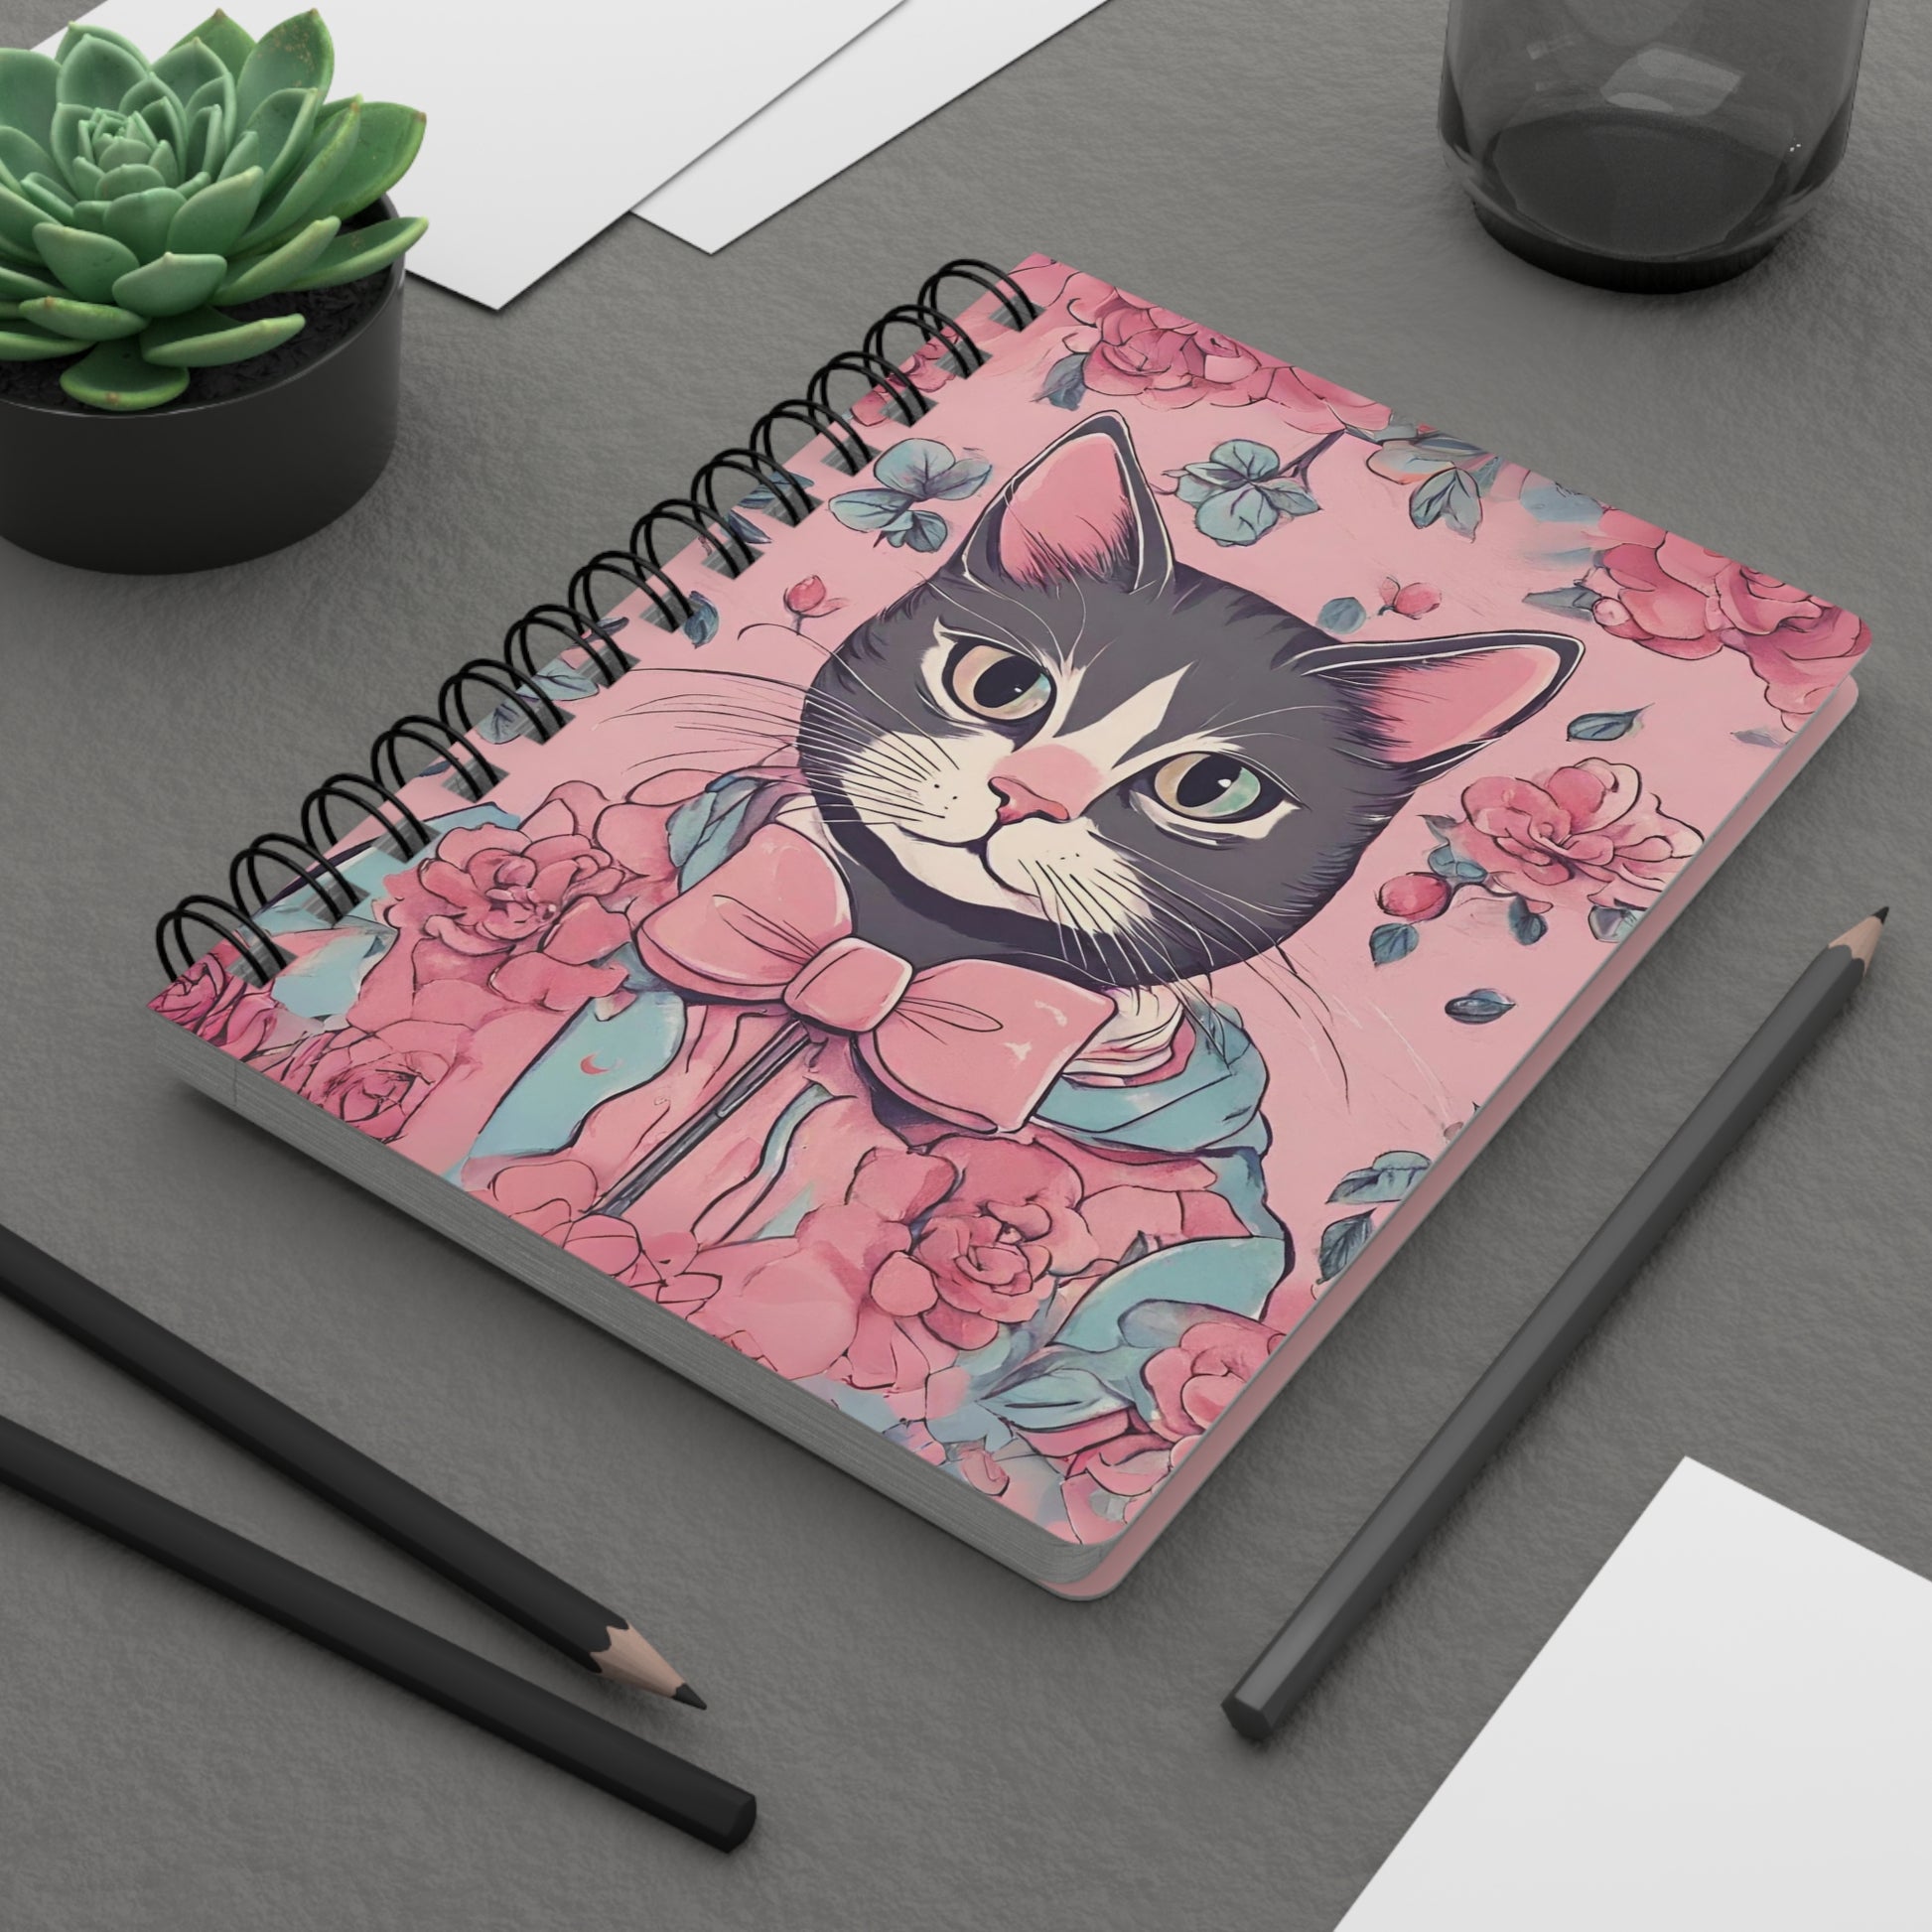 Floral Cat Spiral Journal, Victorian Cat Notebook, Cute vintage cat Journal, cat lover gift, Cottagecore aesthetic journal, Back to school